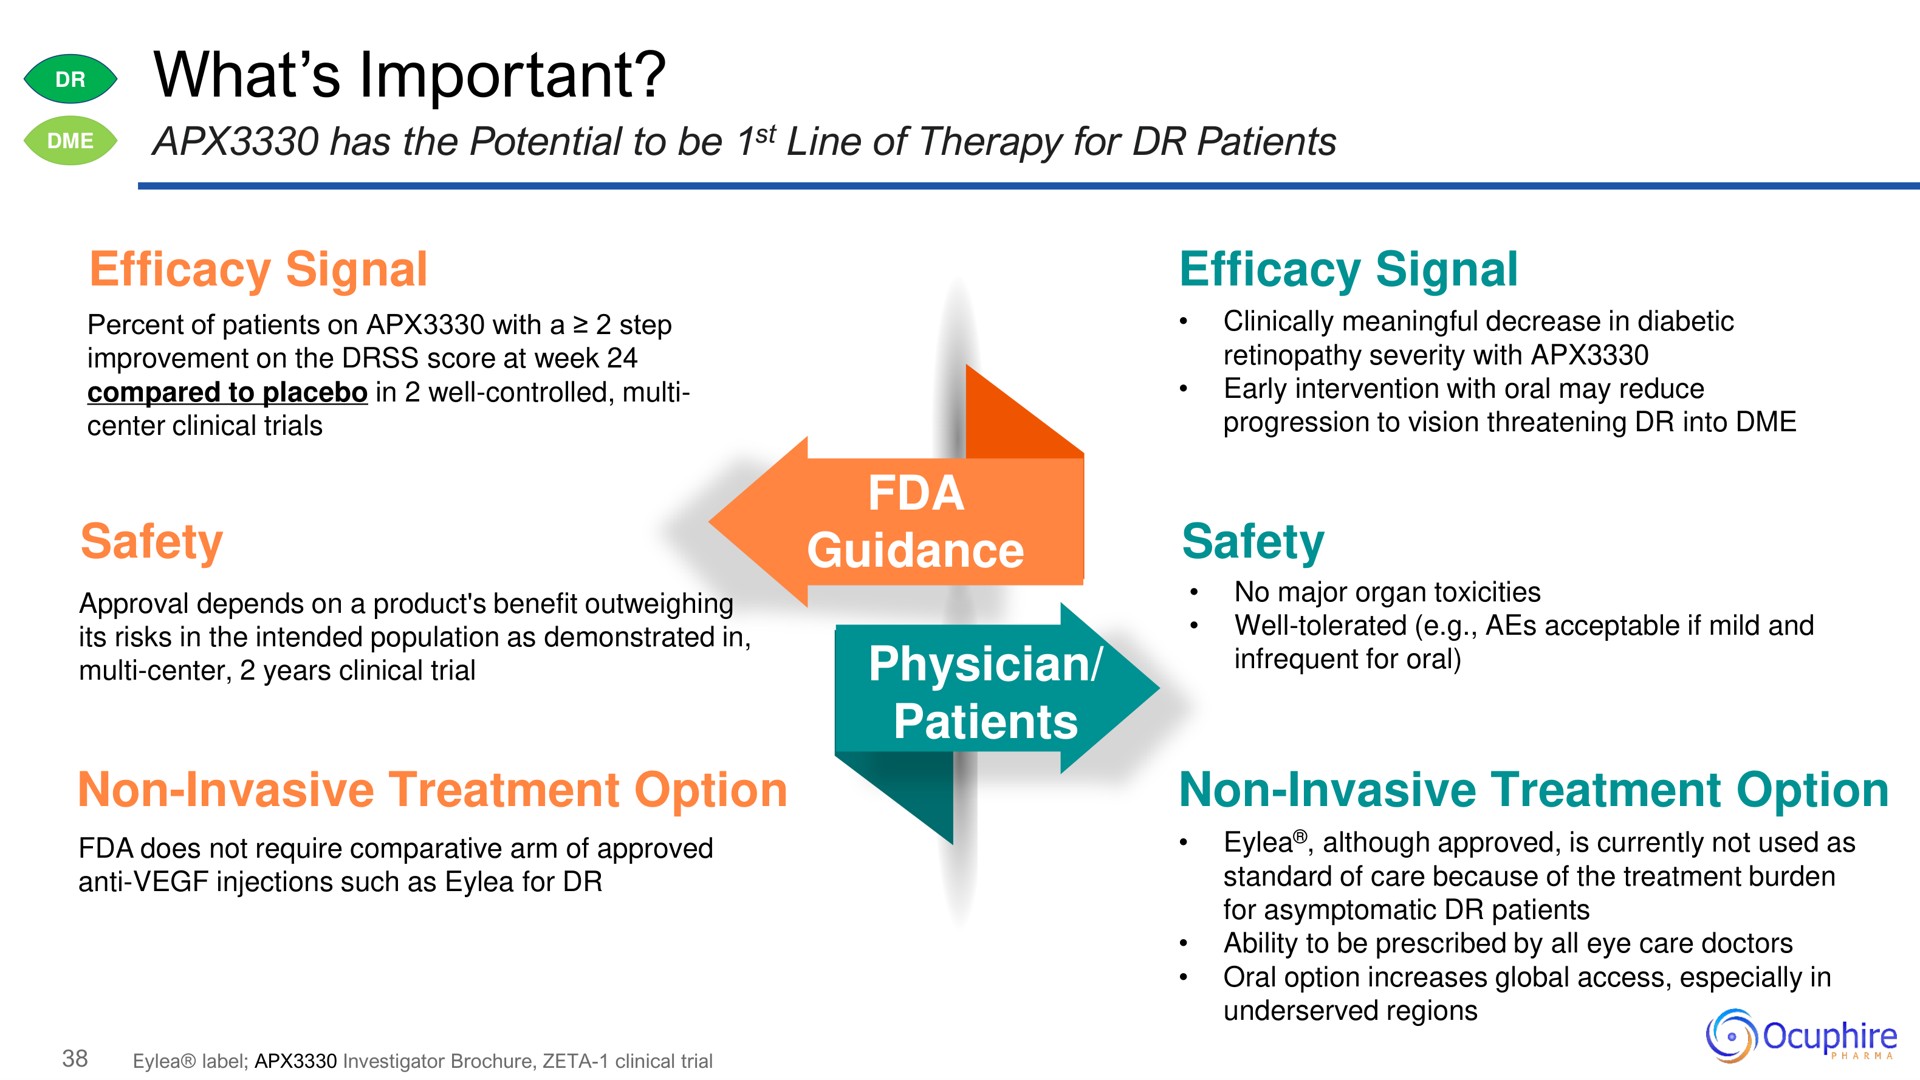 what important efficacy signal safety non invasive treatment option guidance physician patients efficacy signal safety non invasive treatment option | Ocuphire Pharma